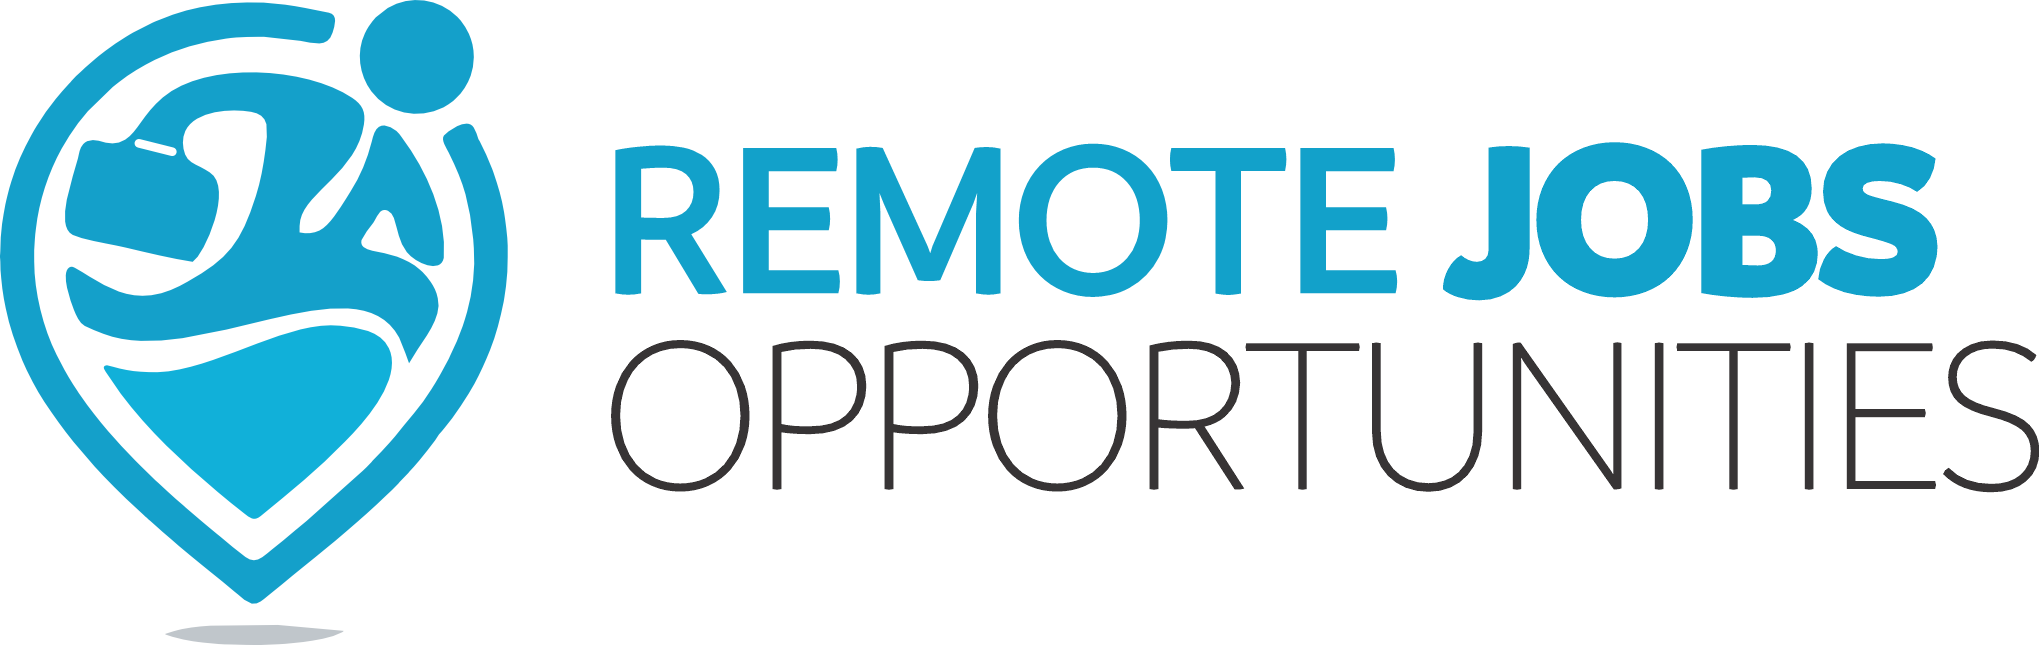 Remote Jobs Opportunities